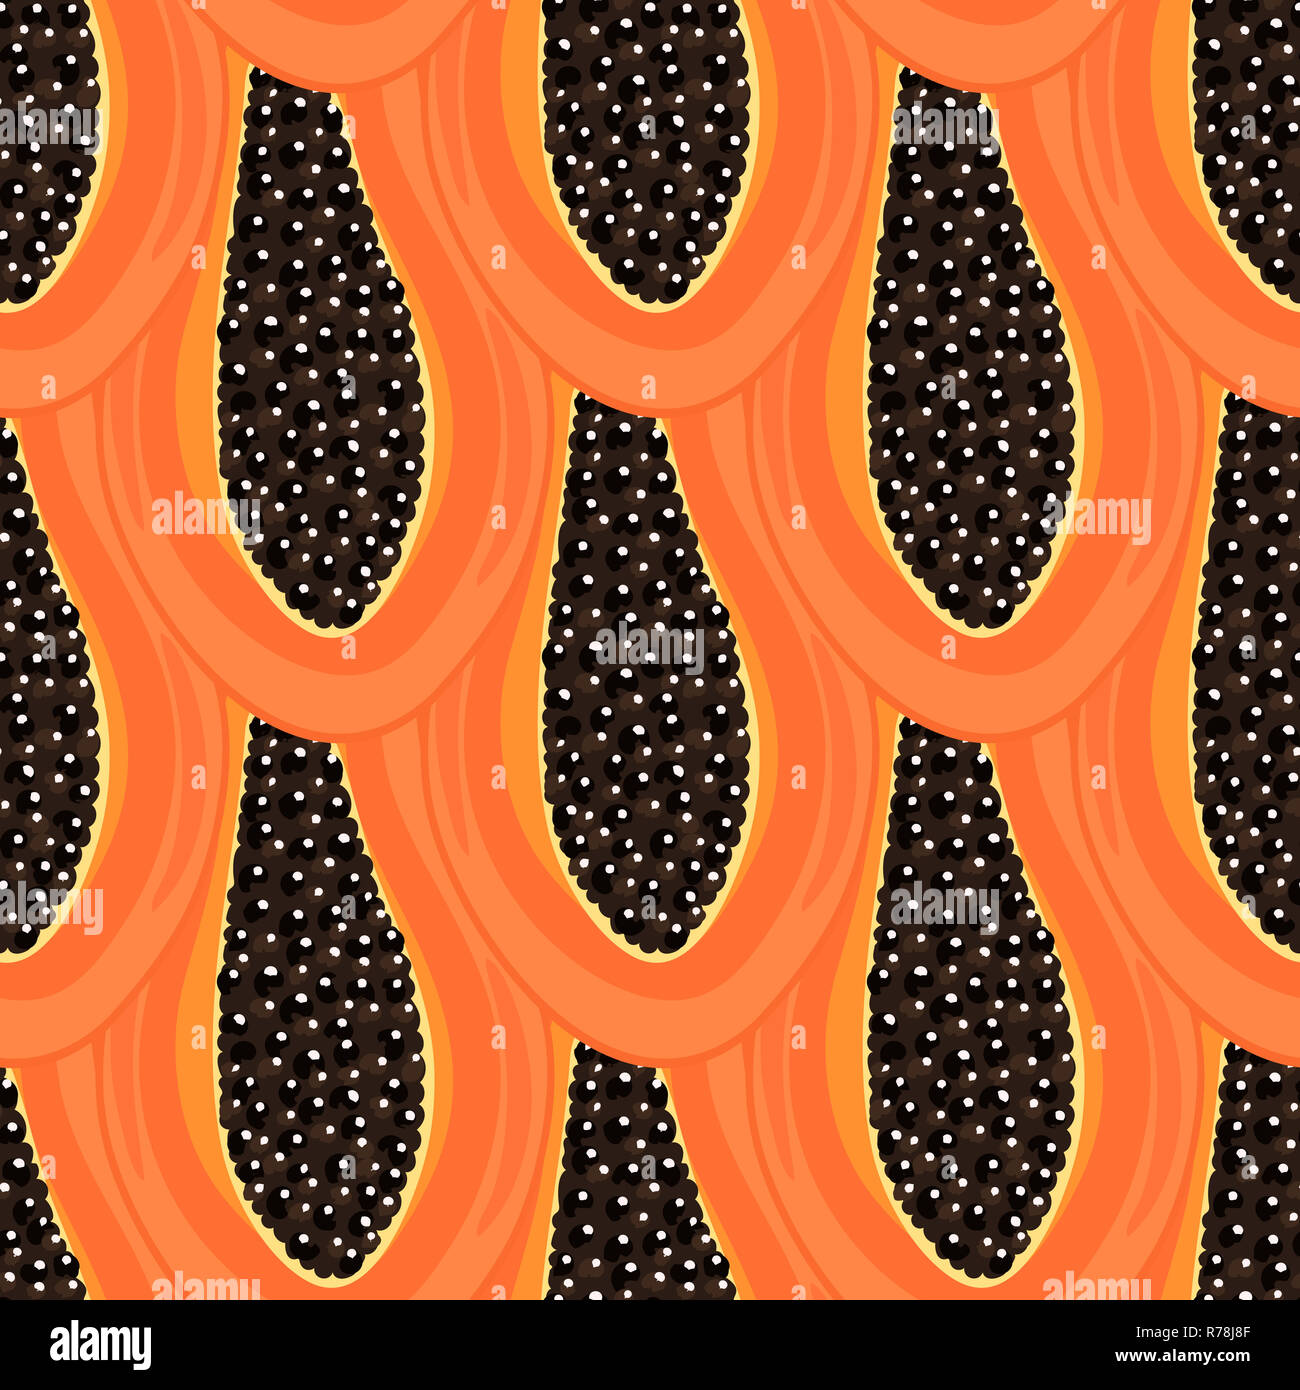 Seamless pattern with tropical fruits. Healthy dessert. Fruity background. Carica papaya. Exotic food. Wrapping paper, print on clothes, wallpaper, summer banner Stock Photo